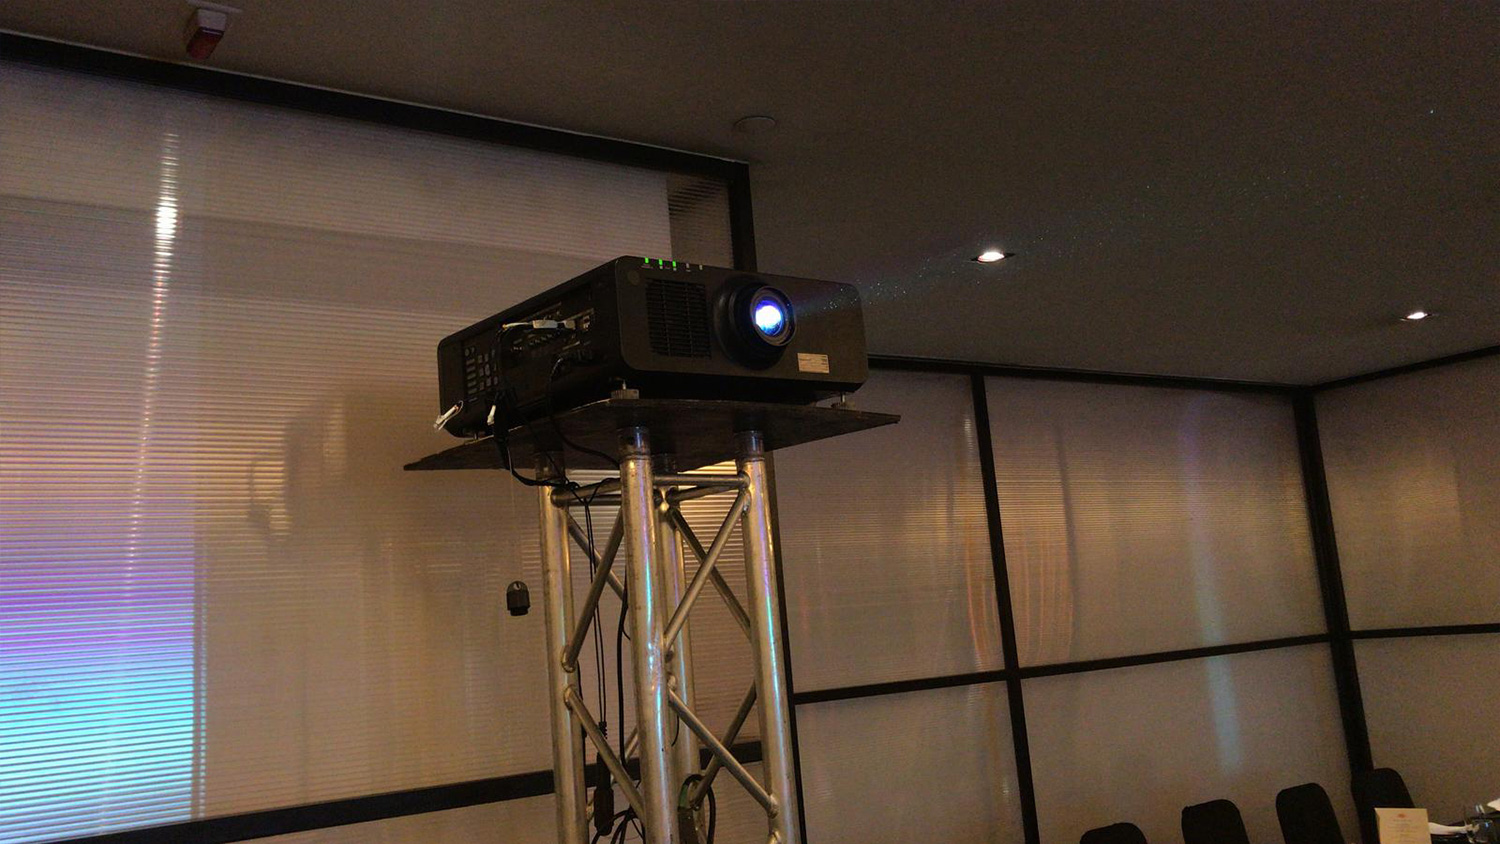 We provide projector screen rental services and comprehensive audio-visual rental services for events in Hong Kong. We own and offer a full suite of audio-visual equipment for hire including audio equipment, LED lighting, video projection, LED walls and the professional technicians to operate it to perfection.